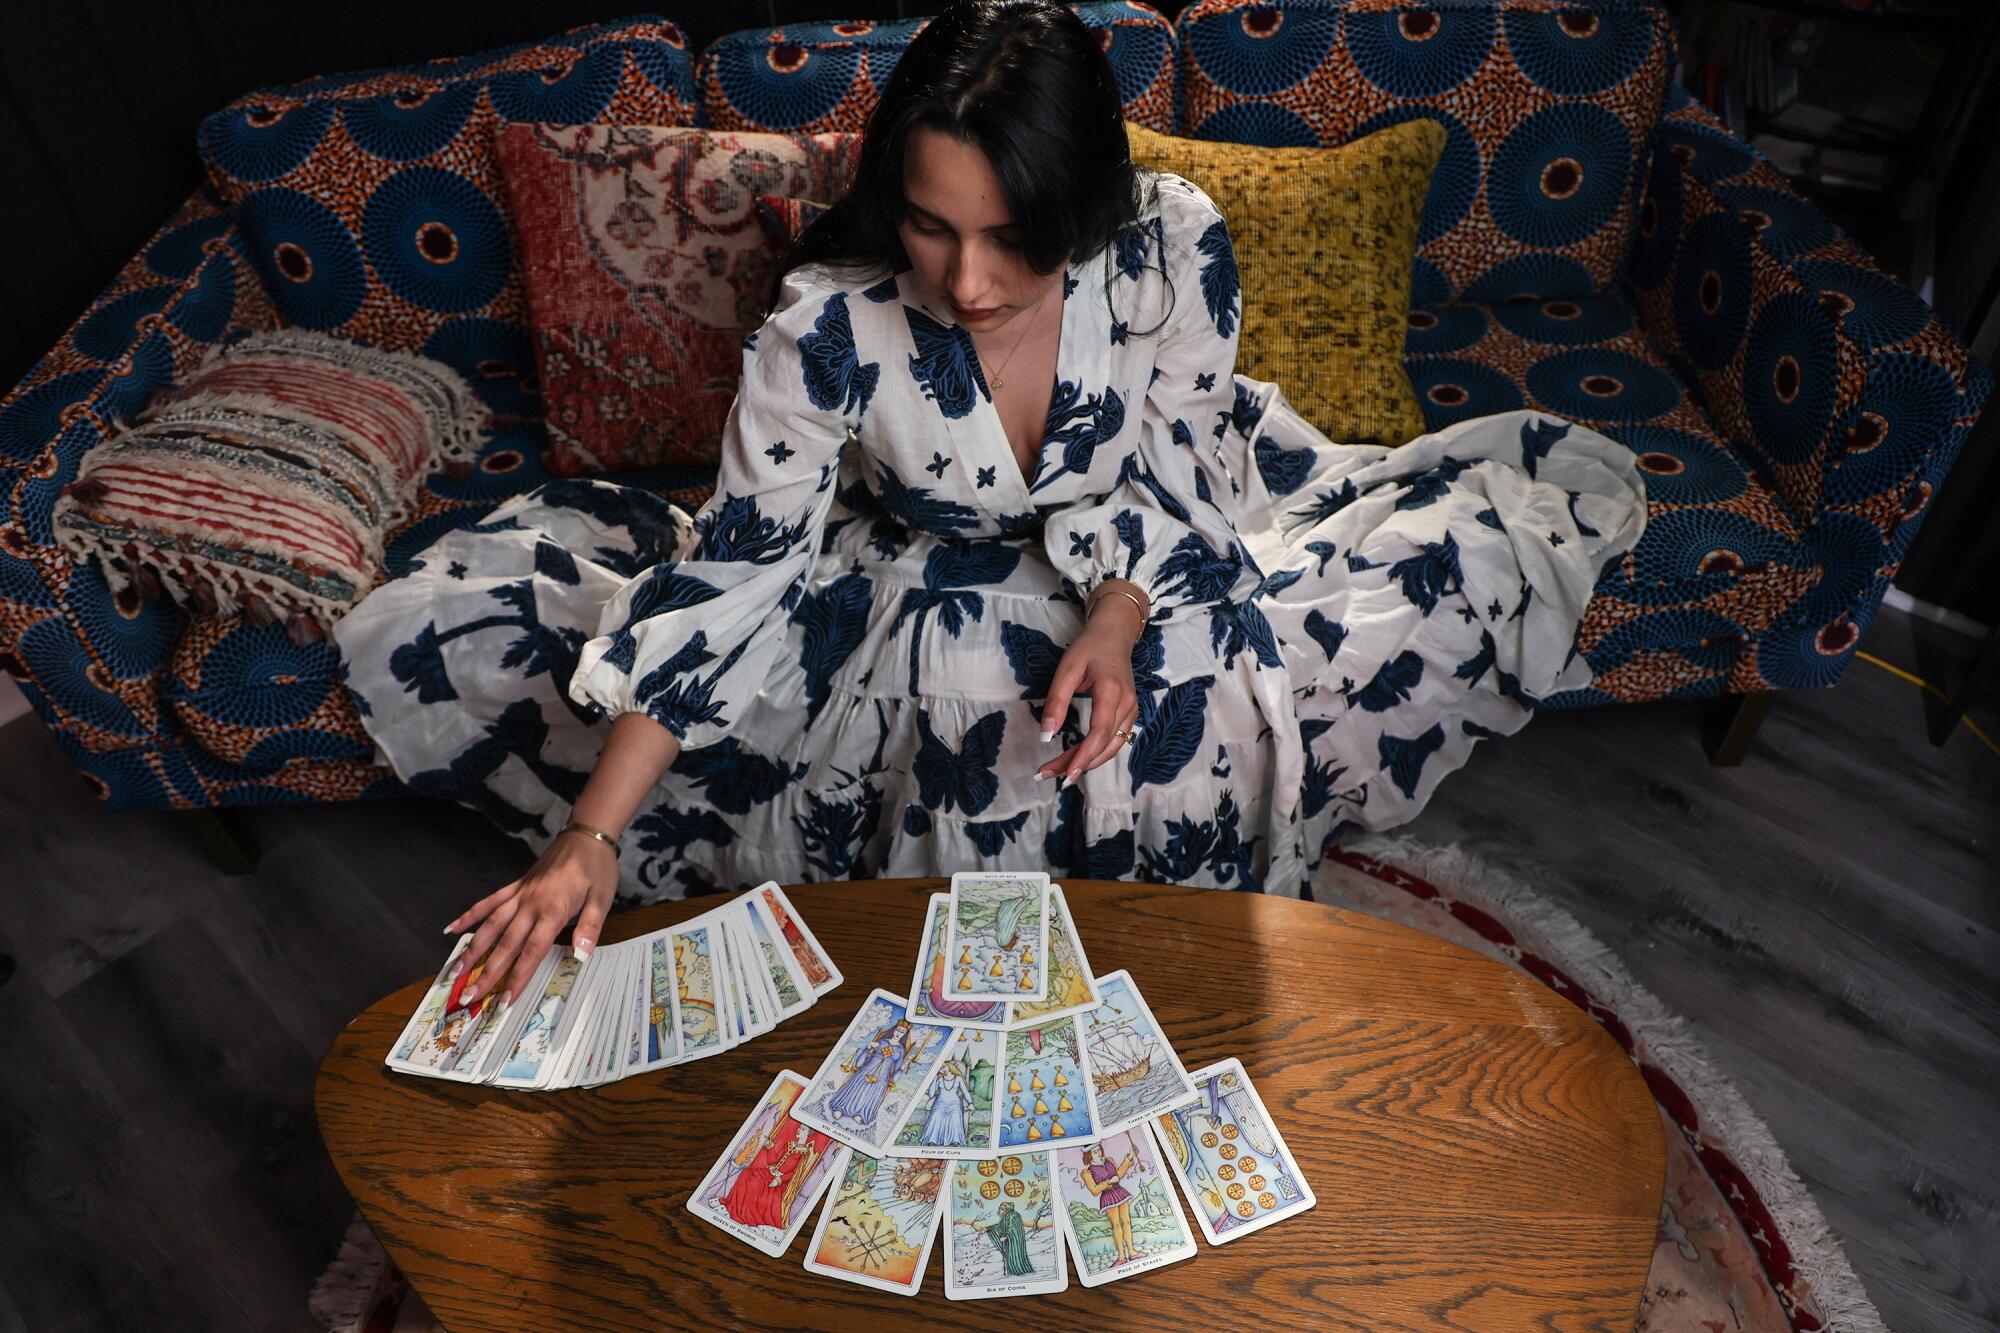 Paulina Stevens lays out tarot cards on a table.